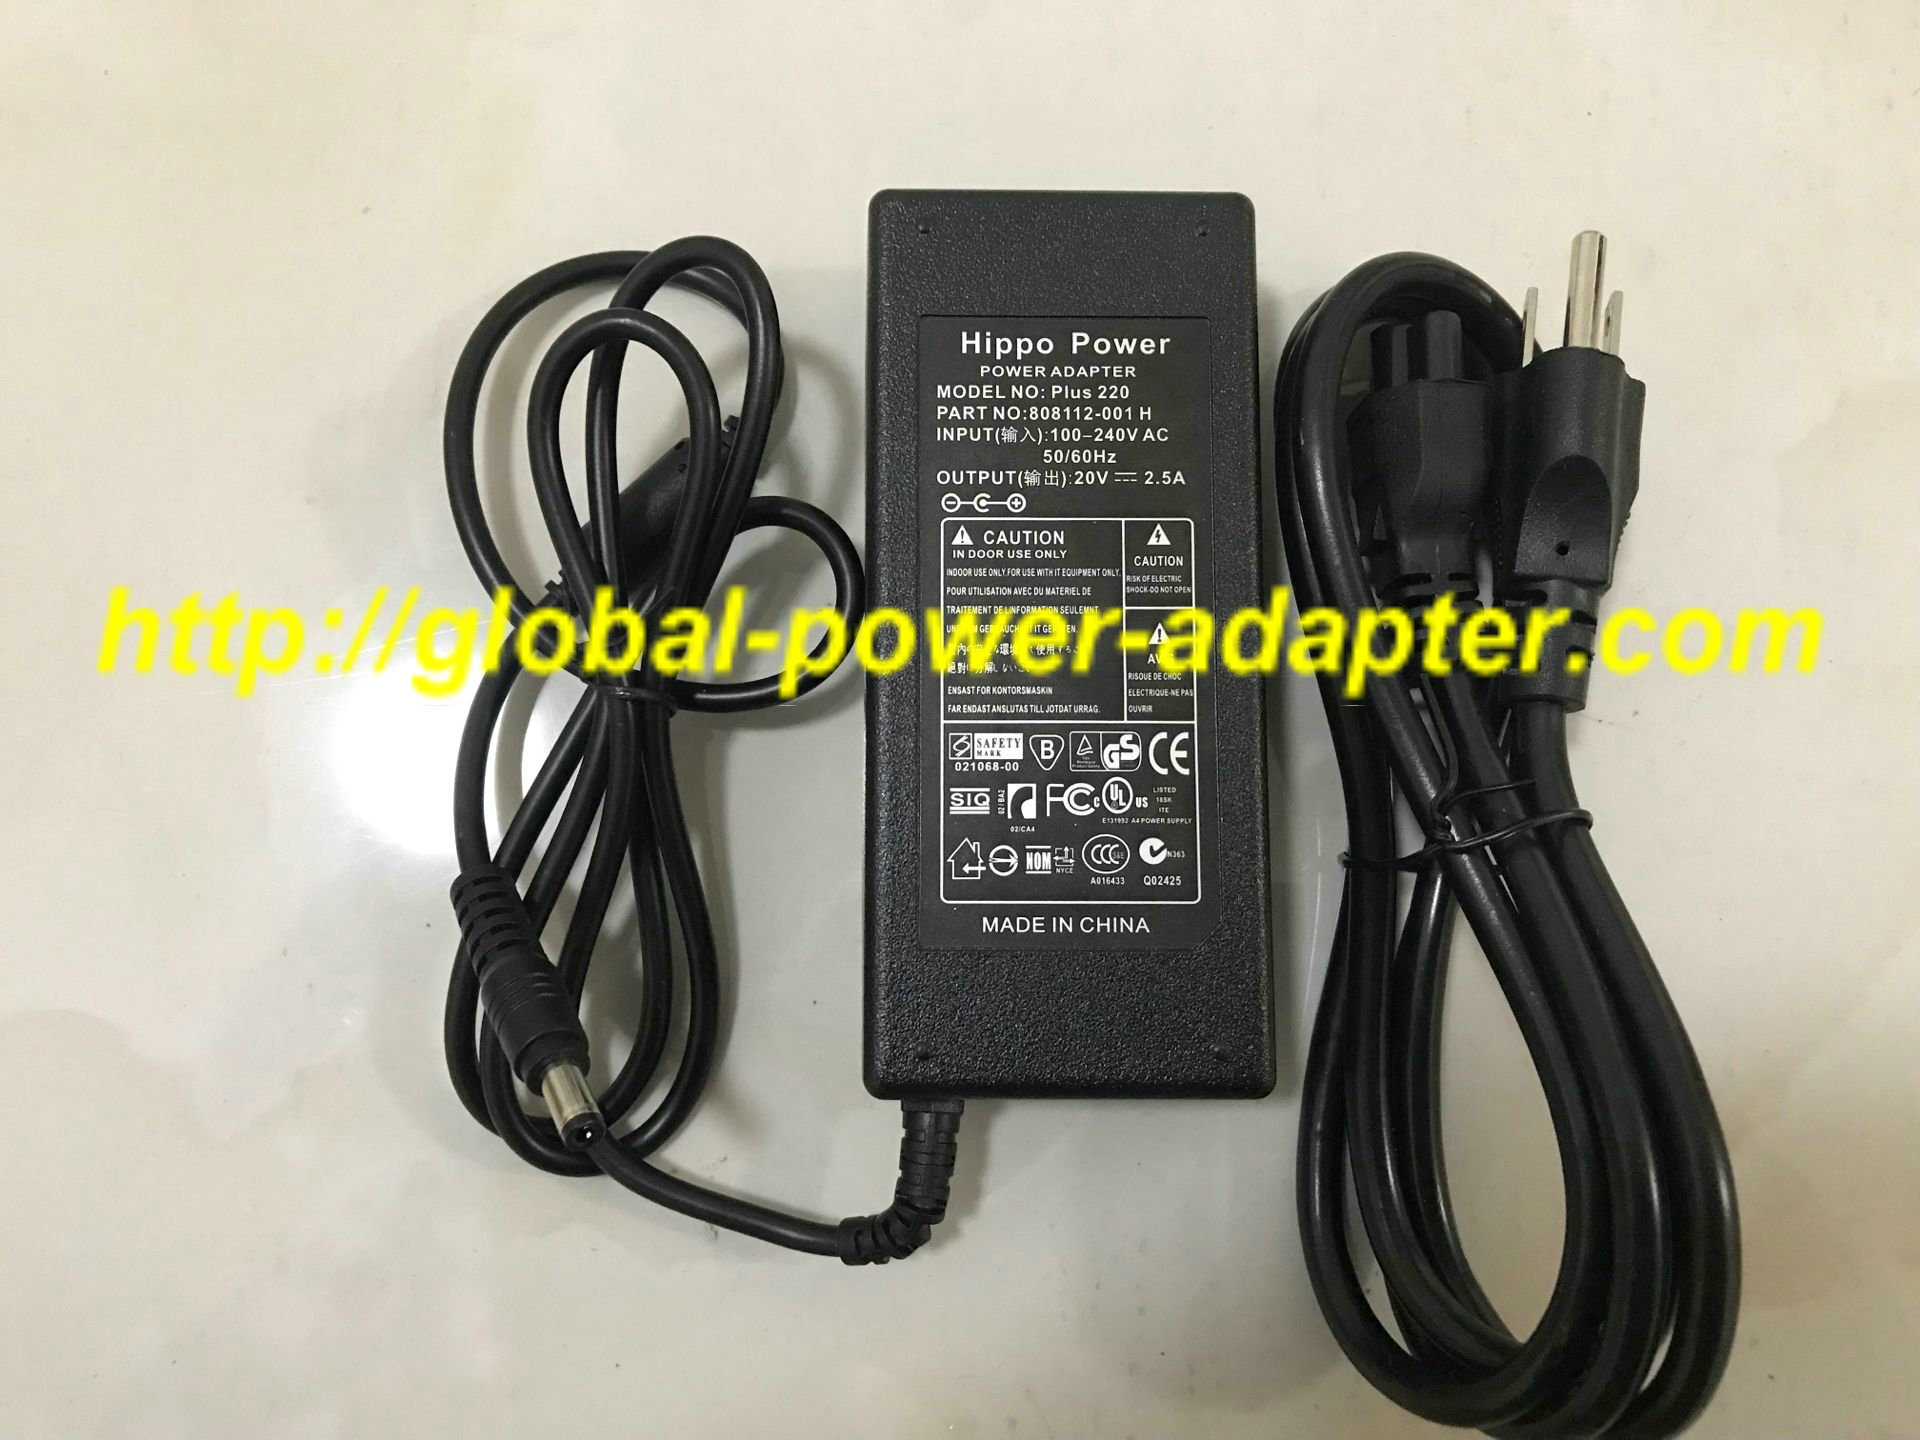 NEW POWER ADAPTER PLUS 220 808112-001 H 20V 2.5A AC ADAPTER